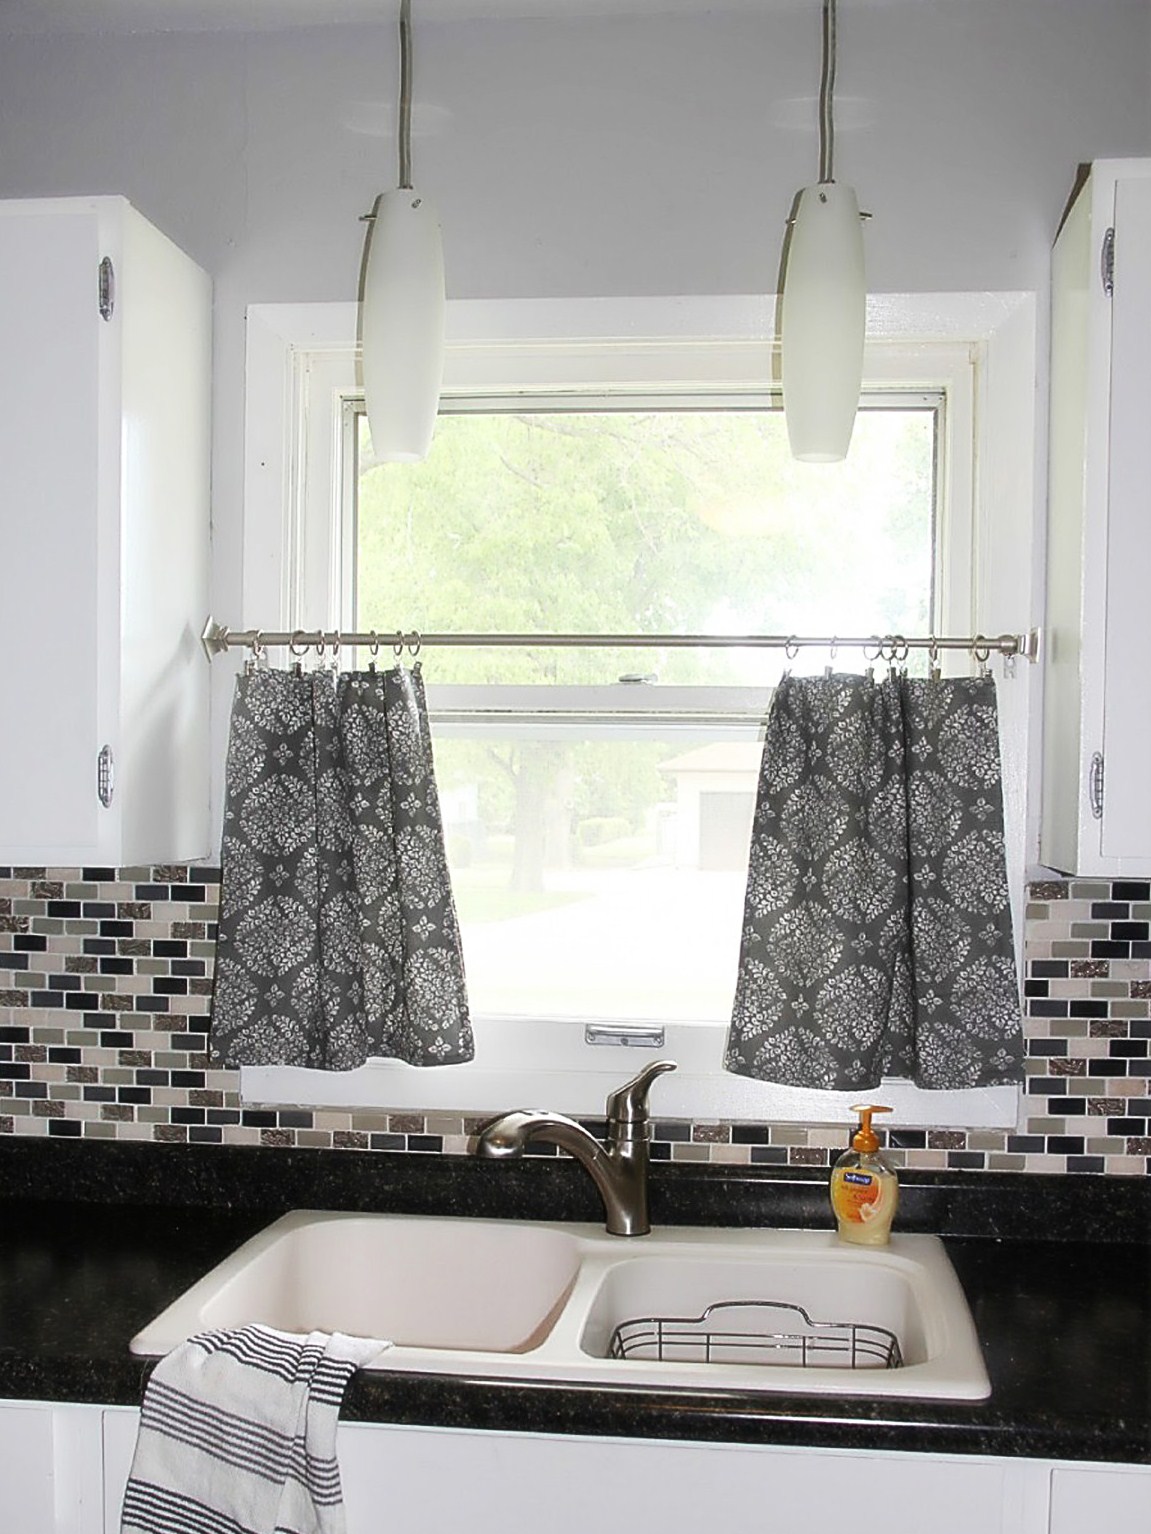 Pendant Lamps Paired Attractive Pendant Lamps Above Sink Paired With Black And White Floral Window Curtains Also Mosaic Kitchen Backsplash Tile Kitchen 20 Elegant And Beautiful Kitchens With Black And White Curtains